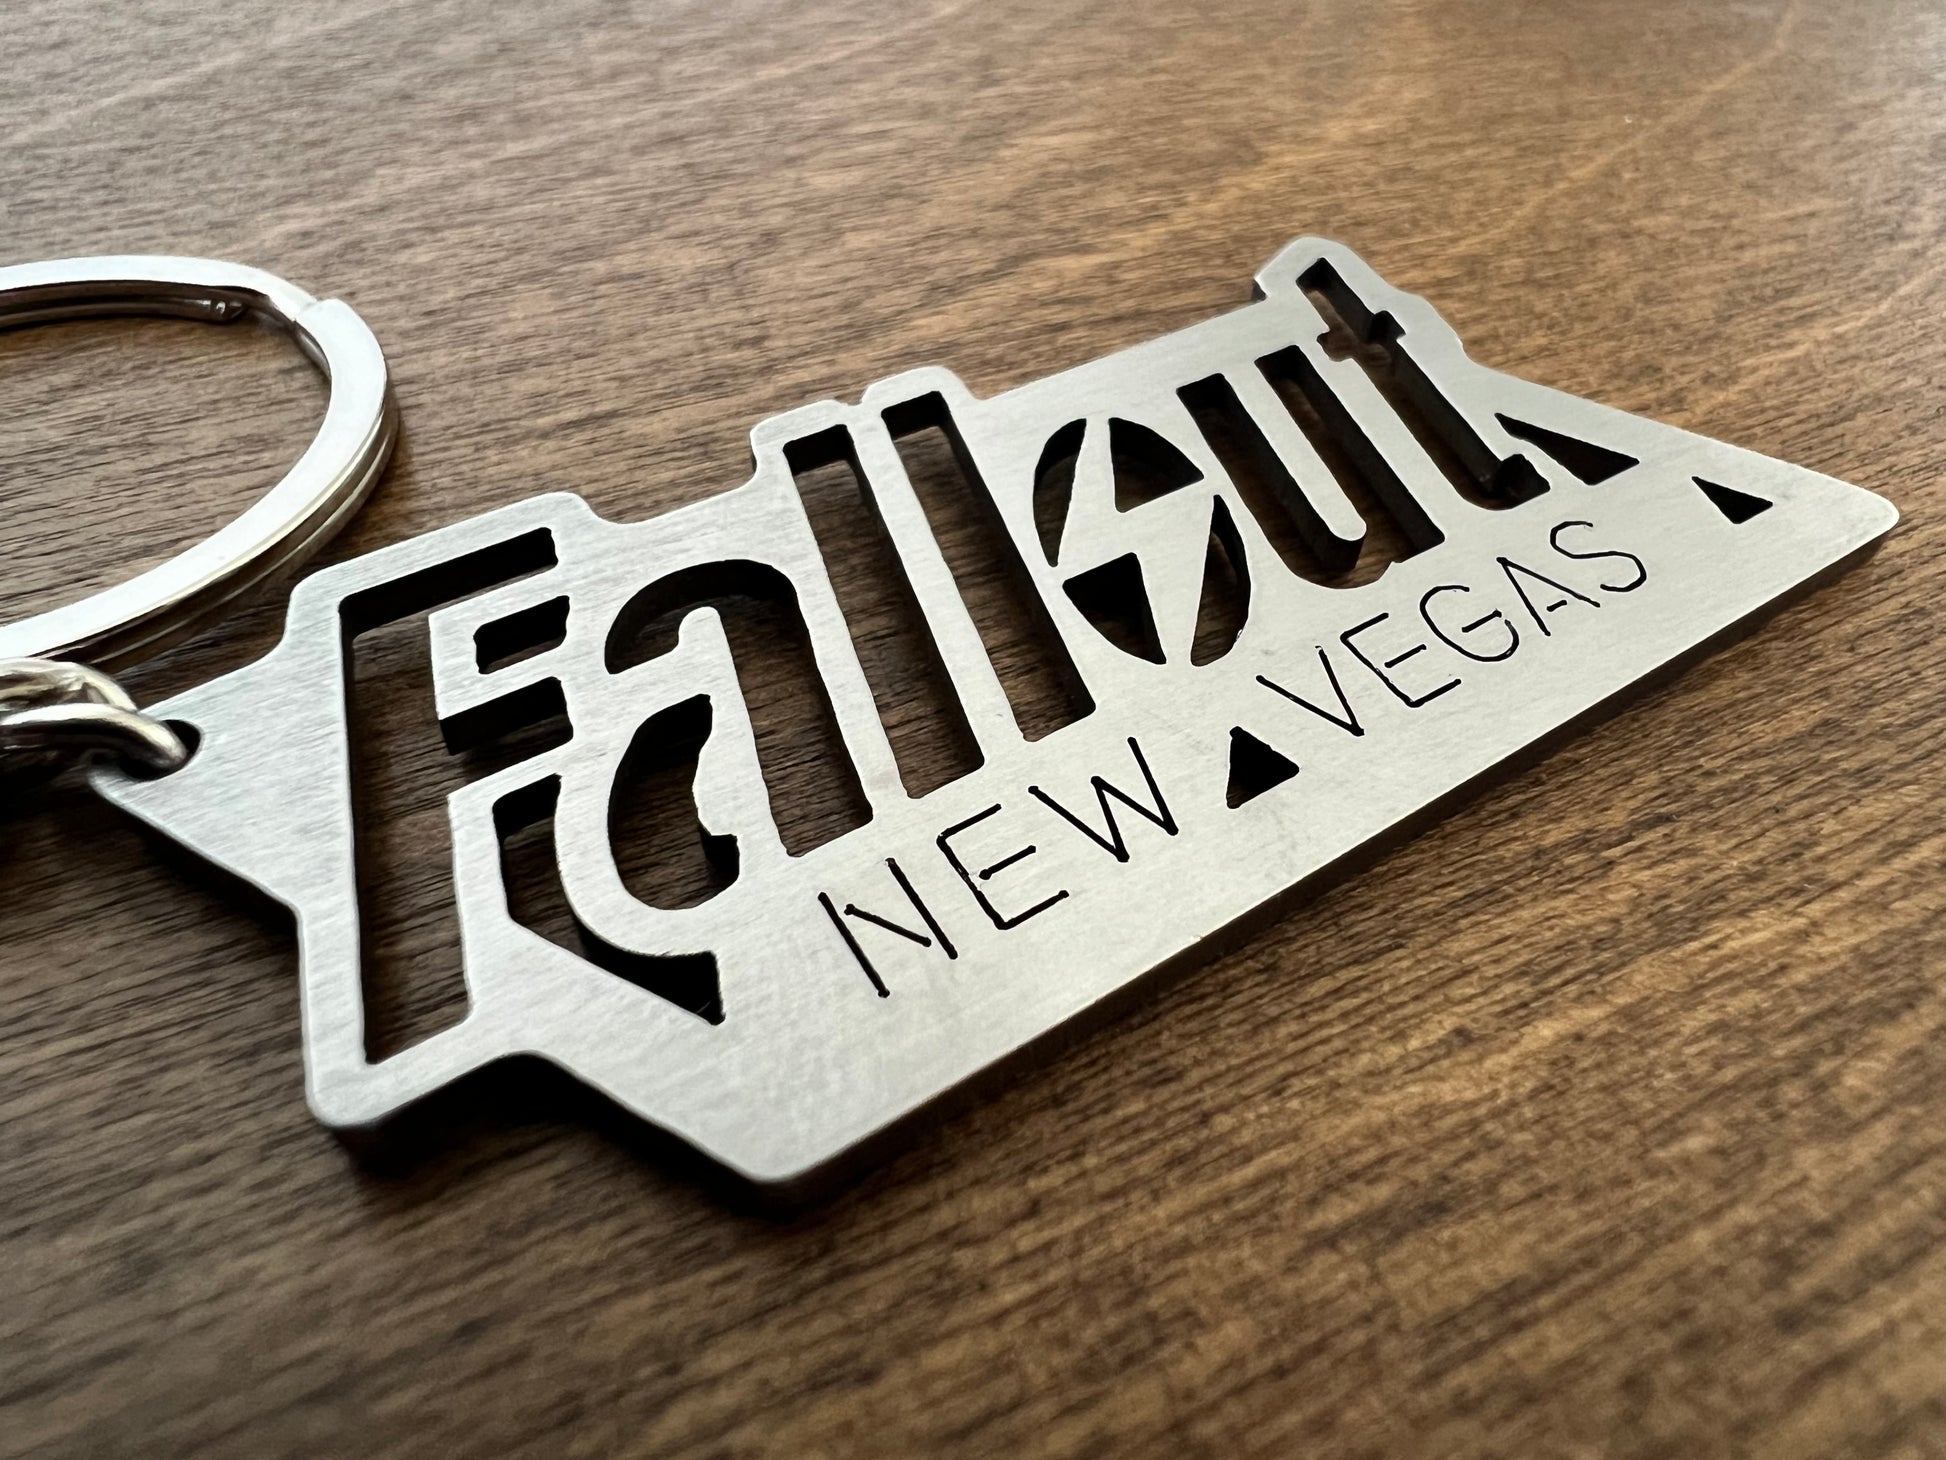 Fallout New Vegas Logo Stainless Steel Keychain